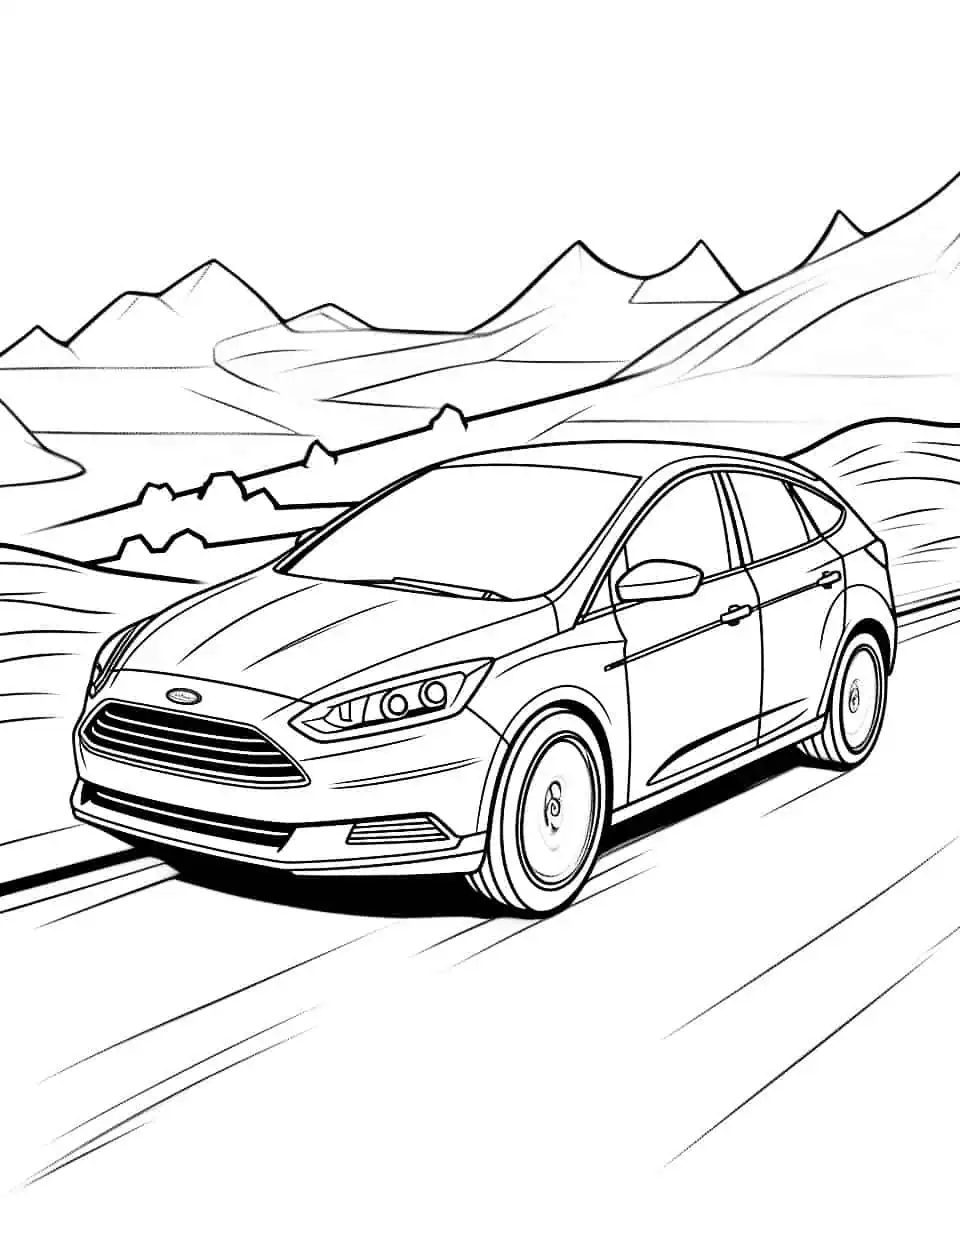 Ford Focus Fun Car Coloring Page - A Ford Focus driving through a sunny landscape.